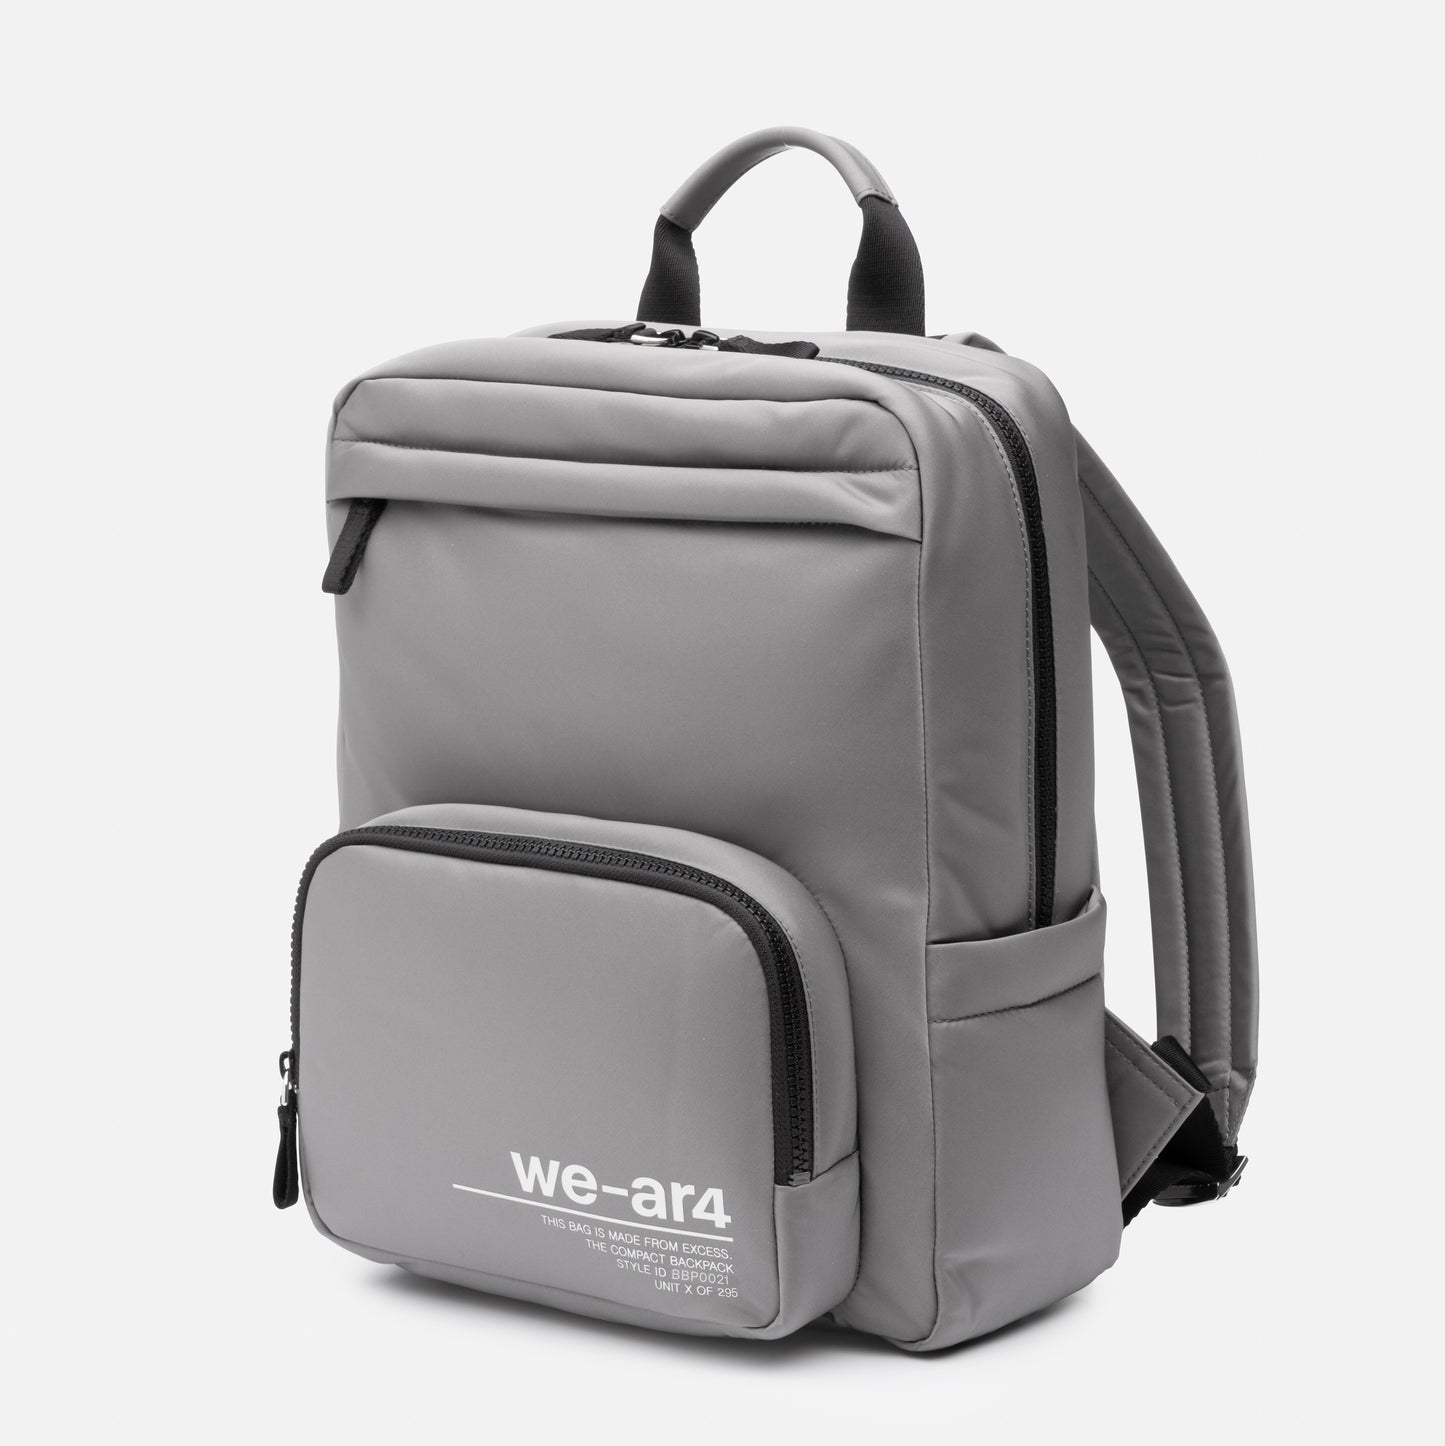 The Compact Backpack